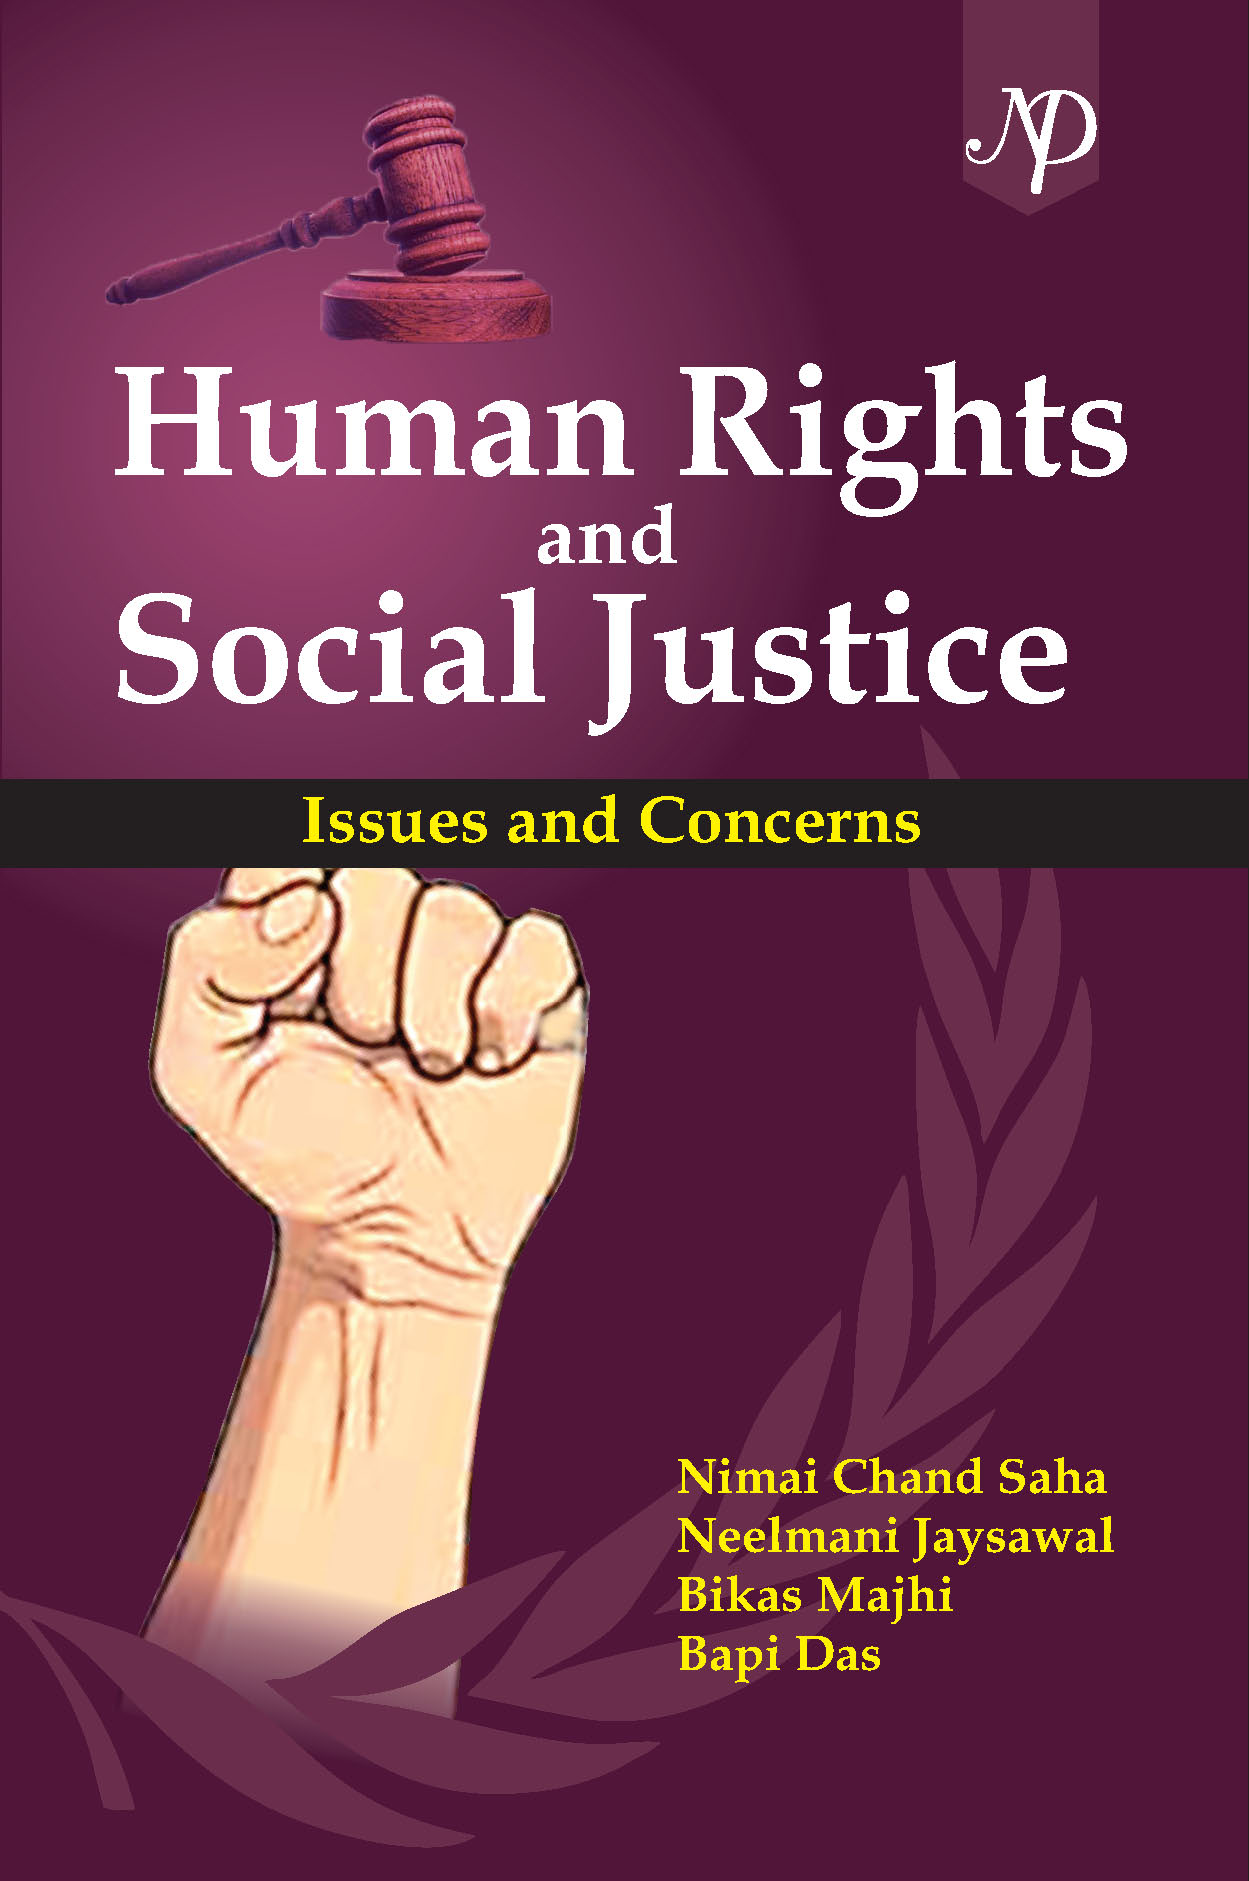 Human Rights and Social Justice: Issues and Concerns